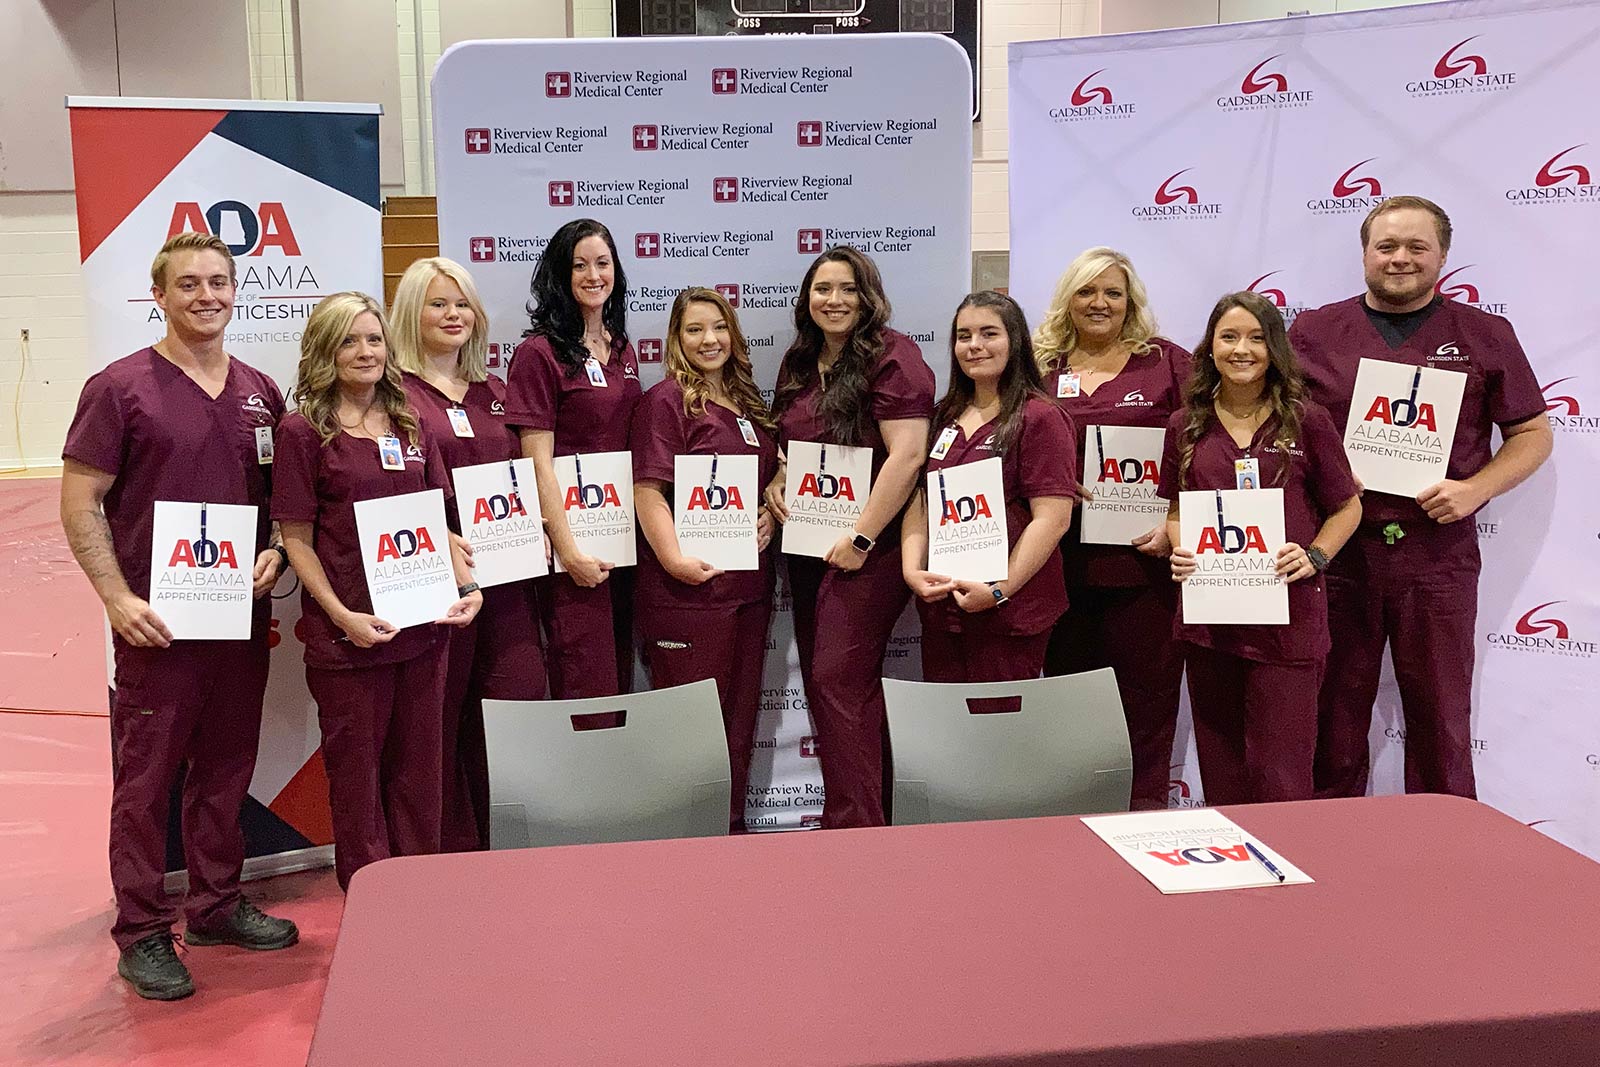 Ten Gadsden State nursing students who signed an apprenticeship with Riverview Regional Medical Center